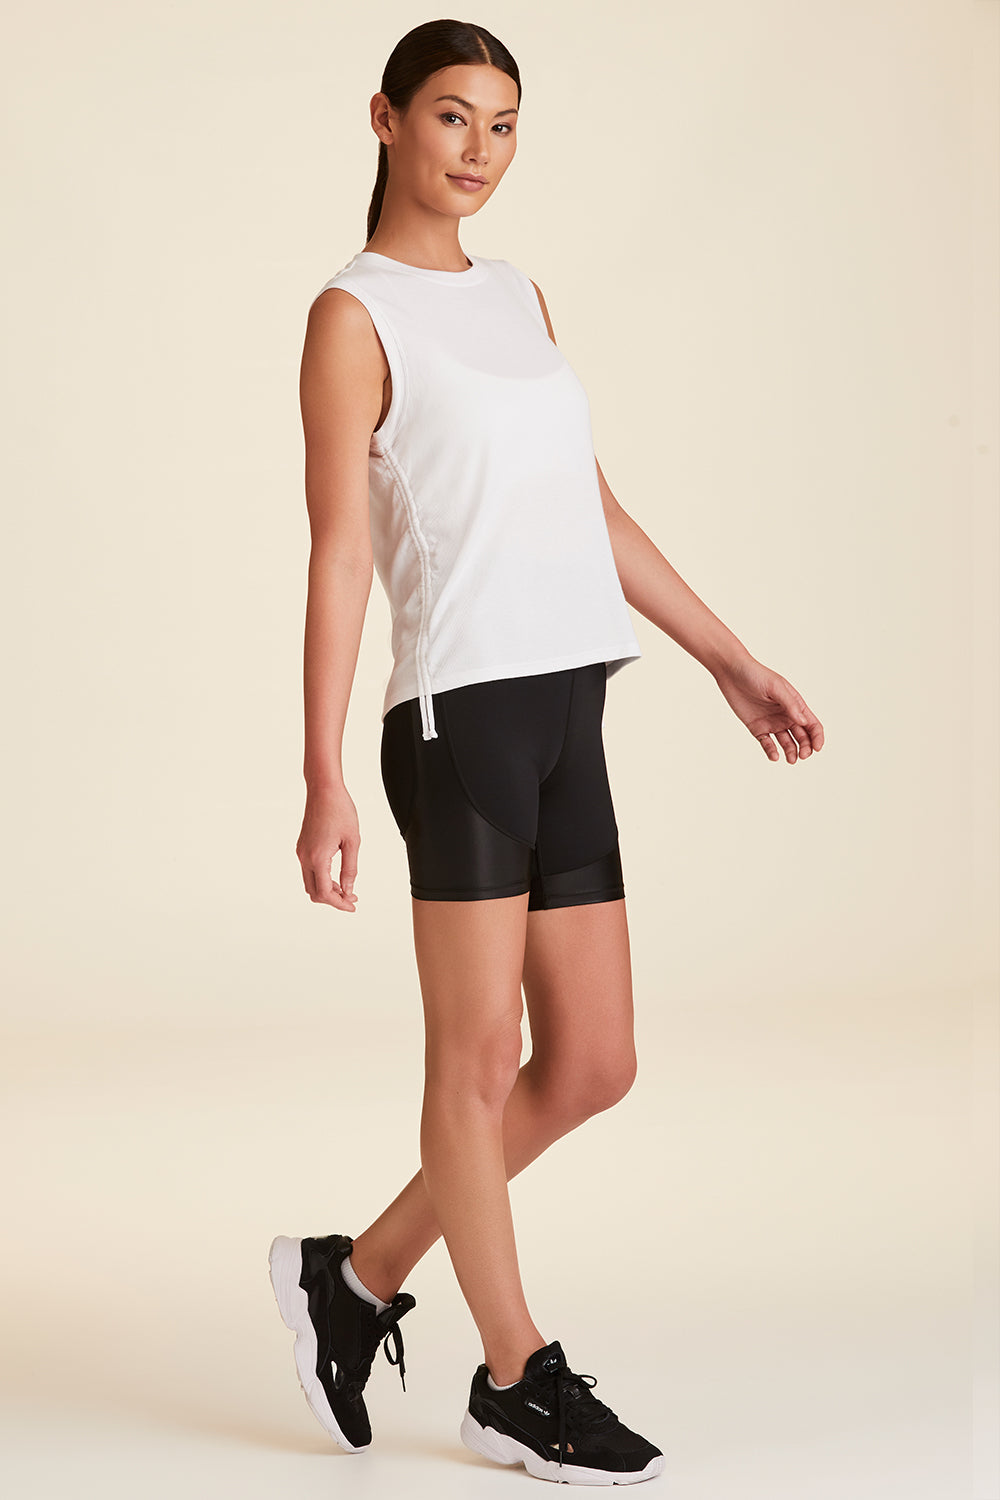 White muscle tank for women from Alala activewear